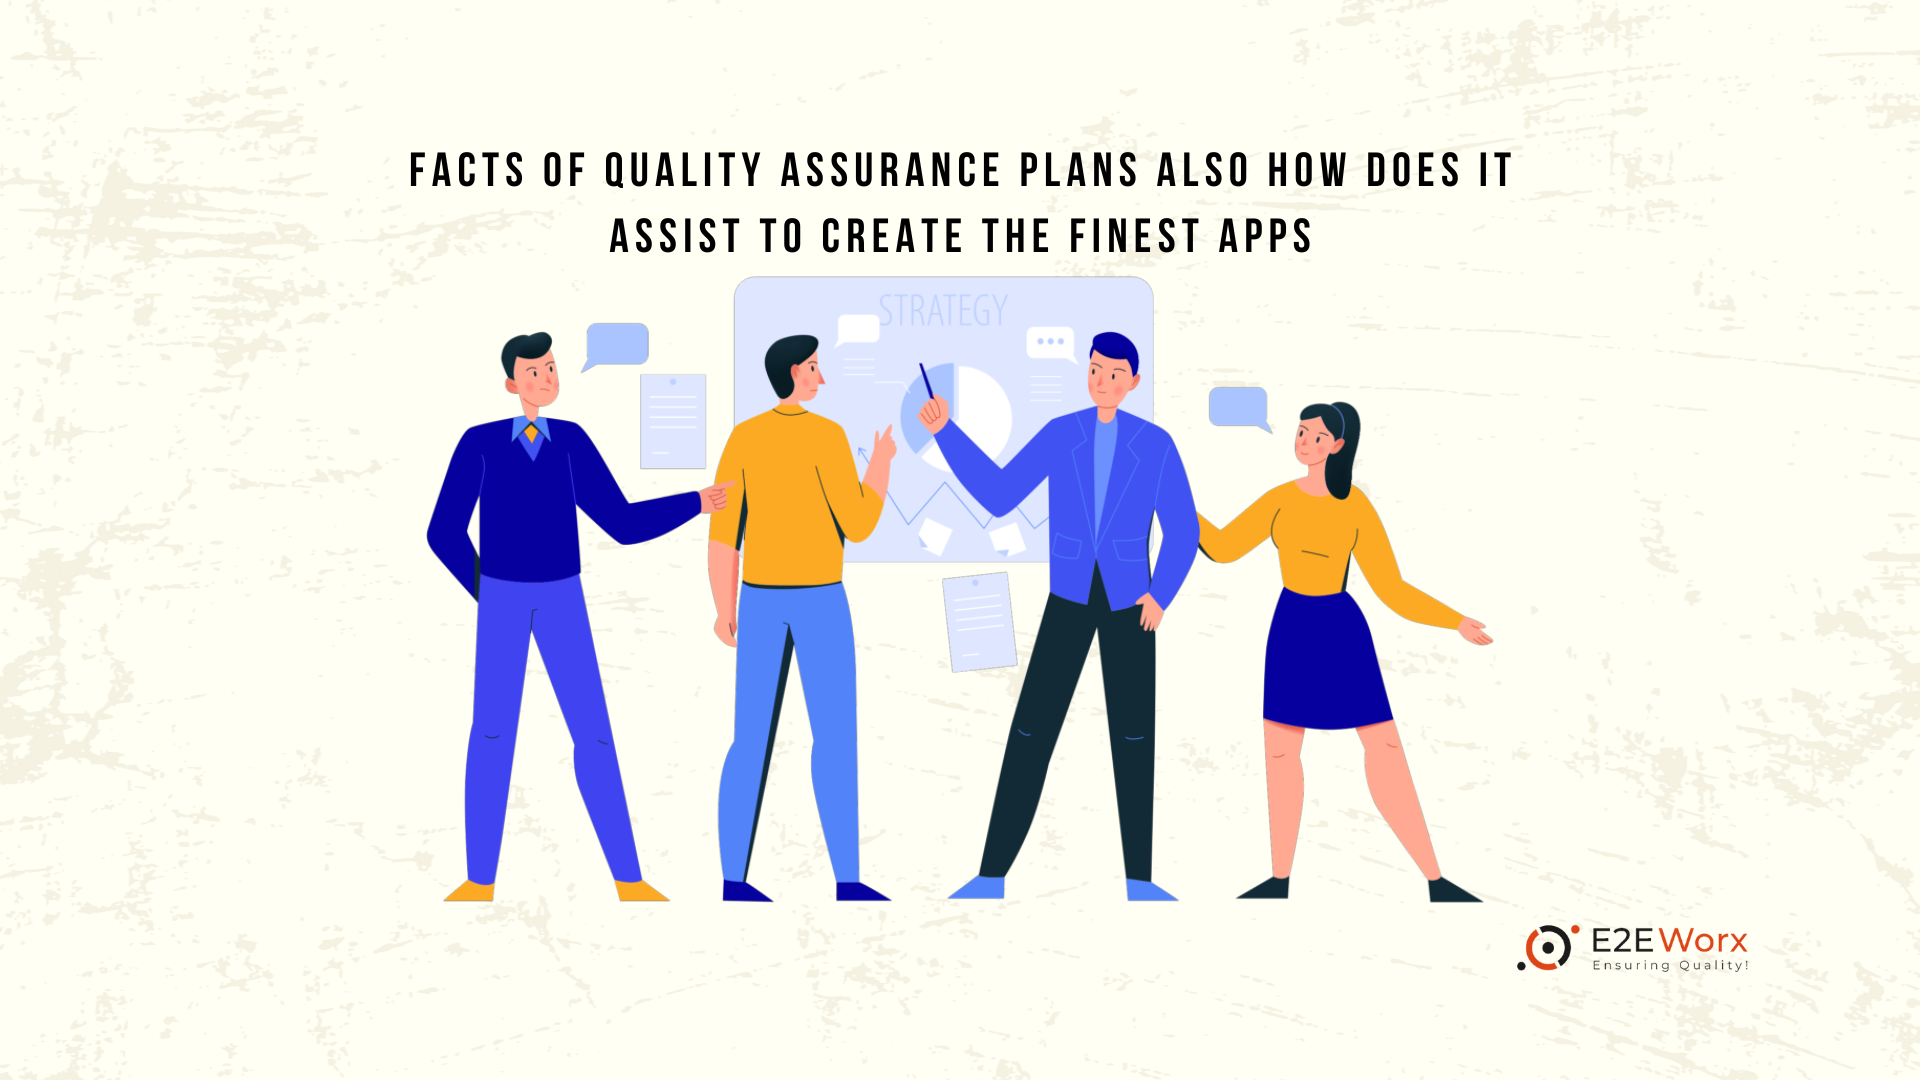 Facts of Software Quality Assurance plans – How Does It Assist to Create the Finest Apps